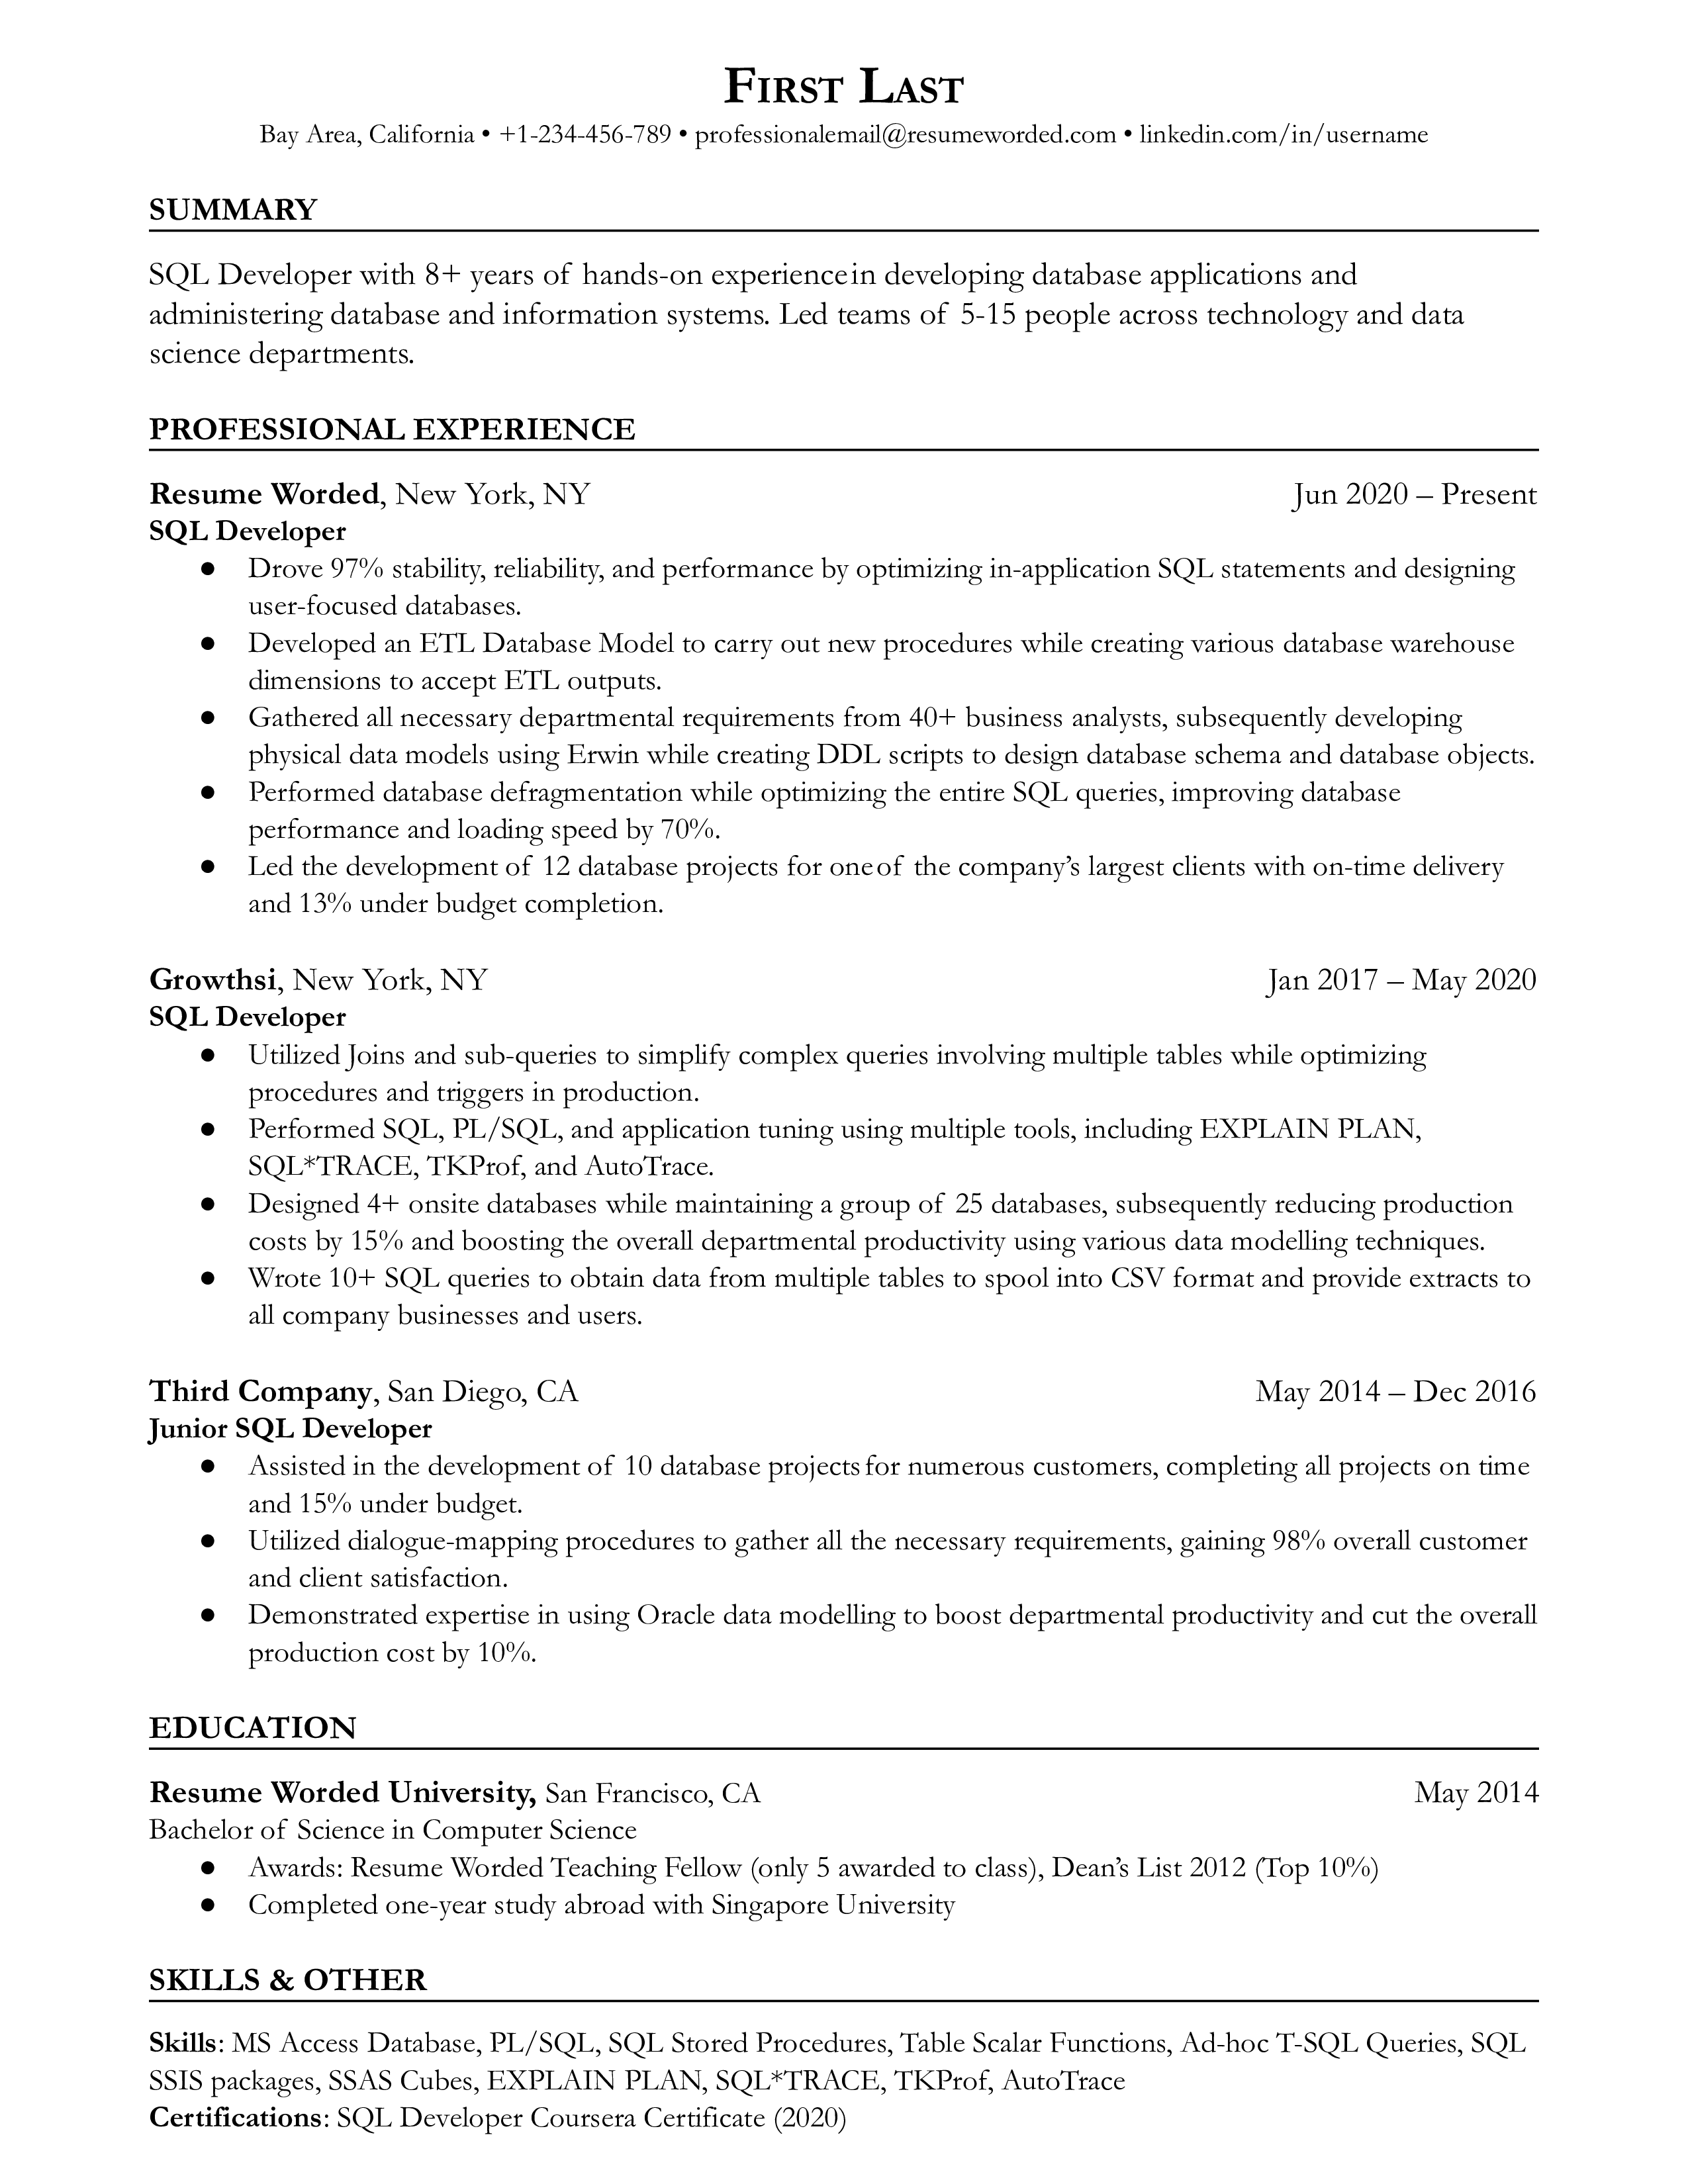 This SQL Developer resume template details extensive experience in improving database and information systems
